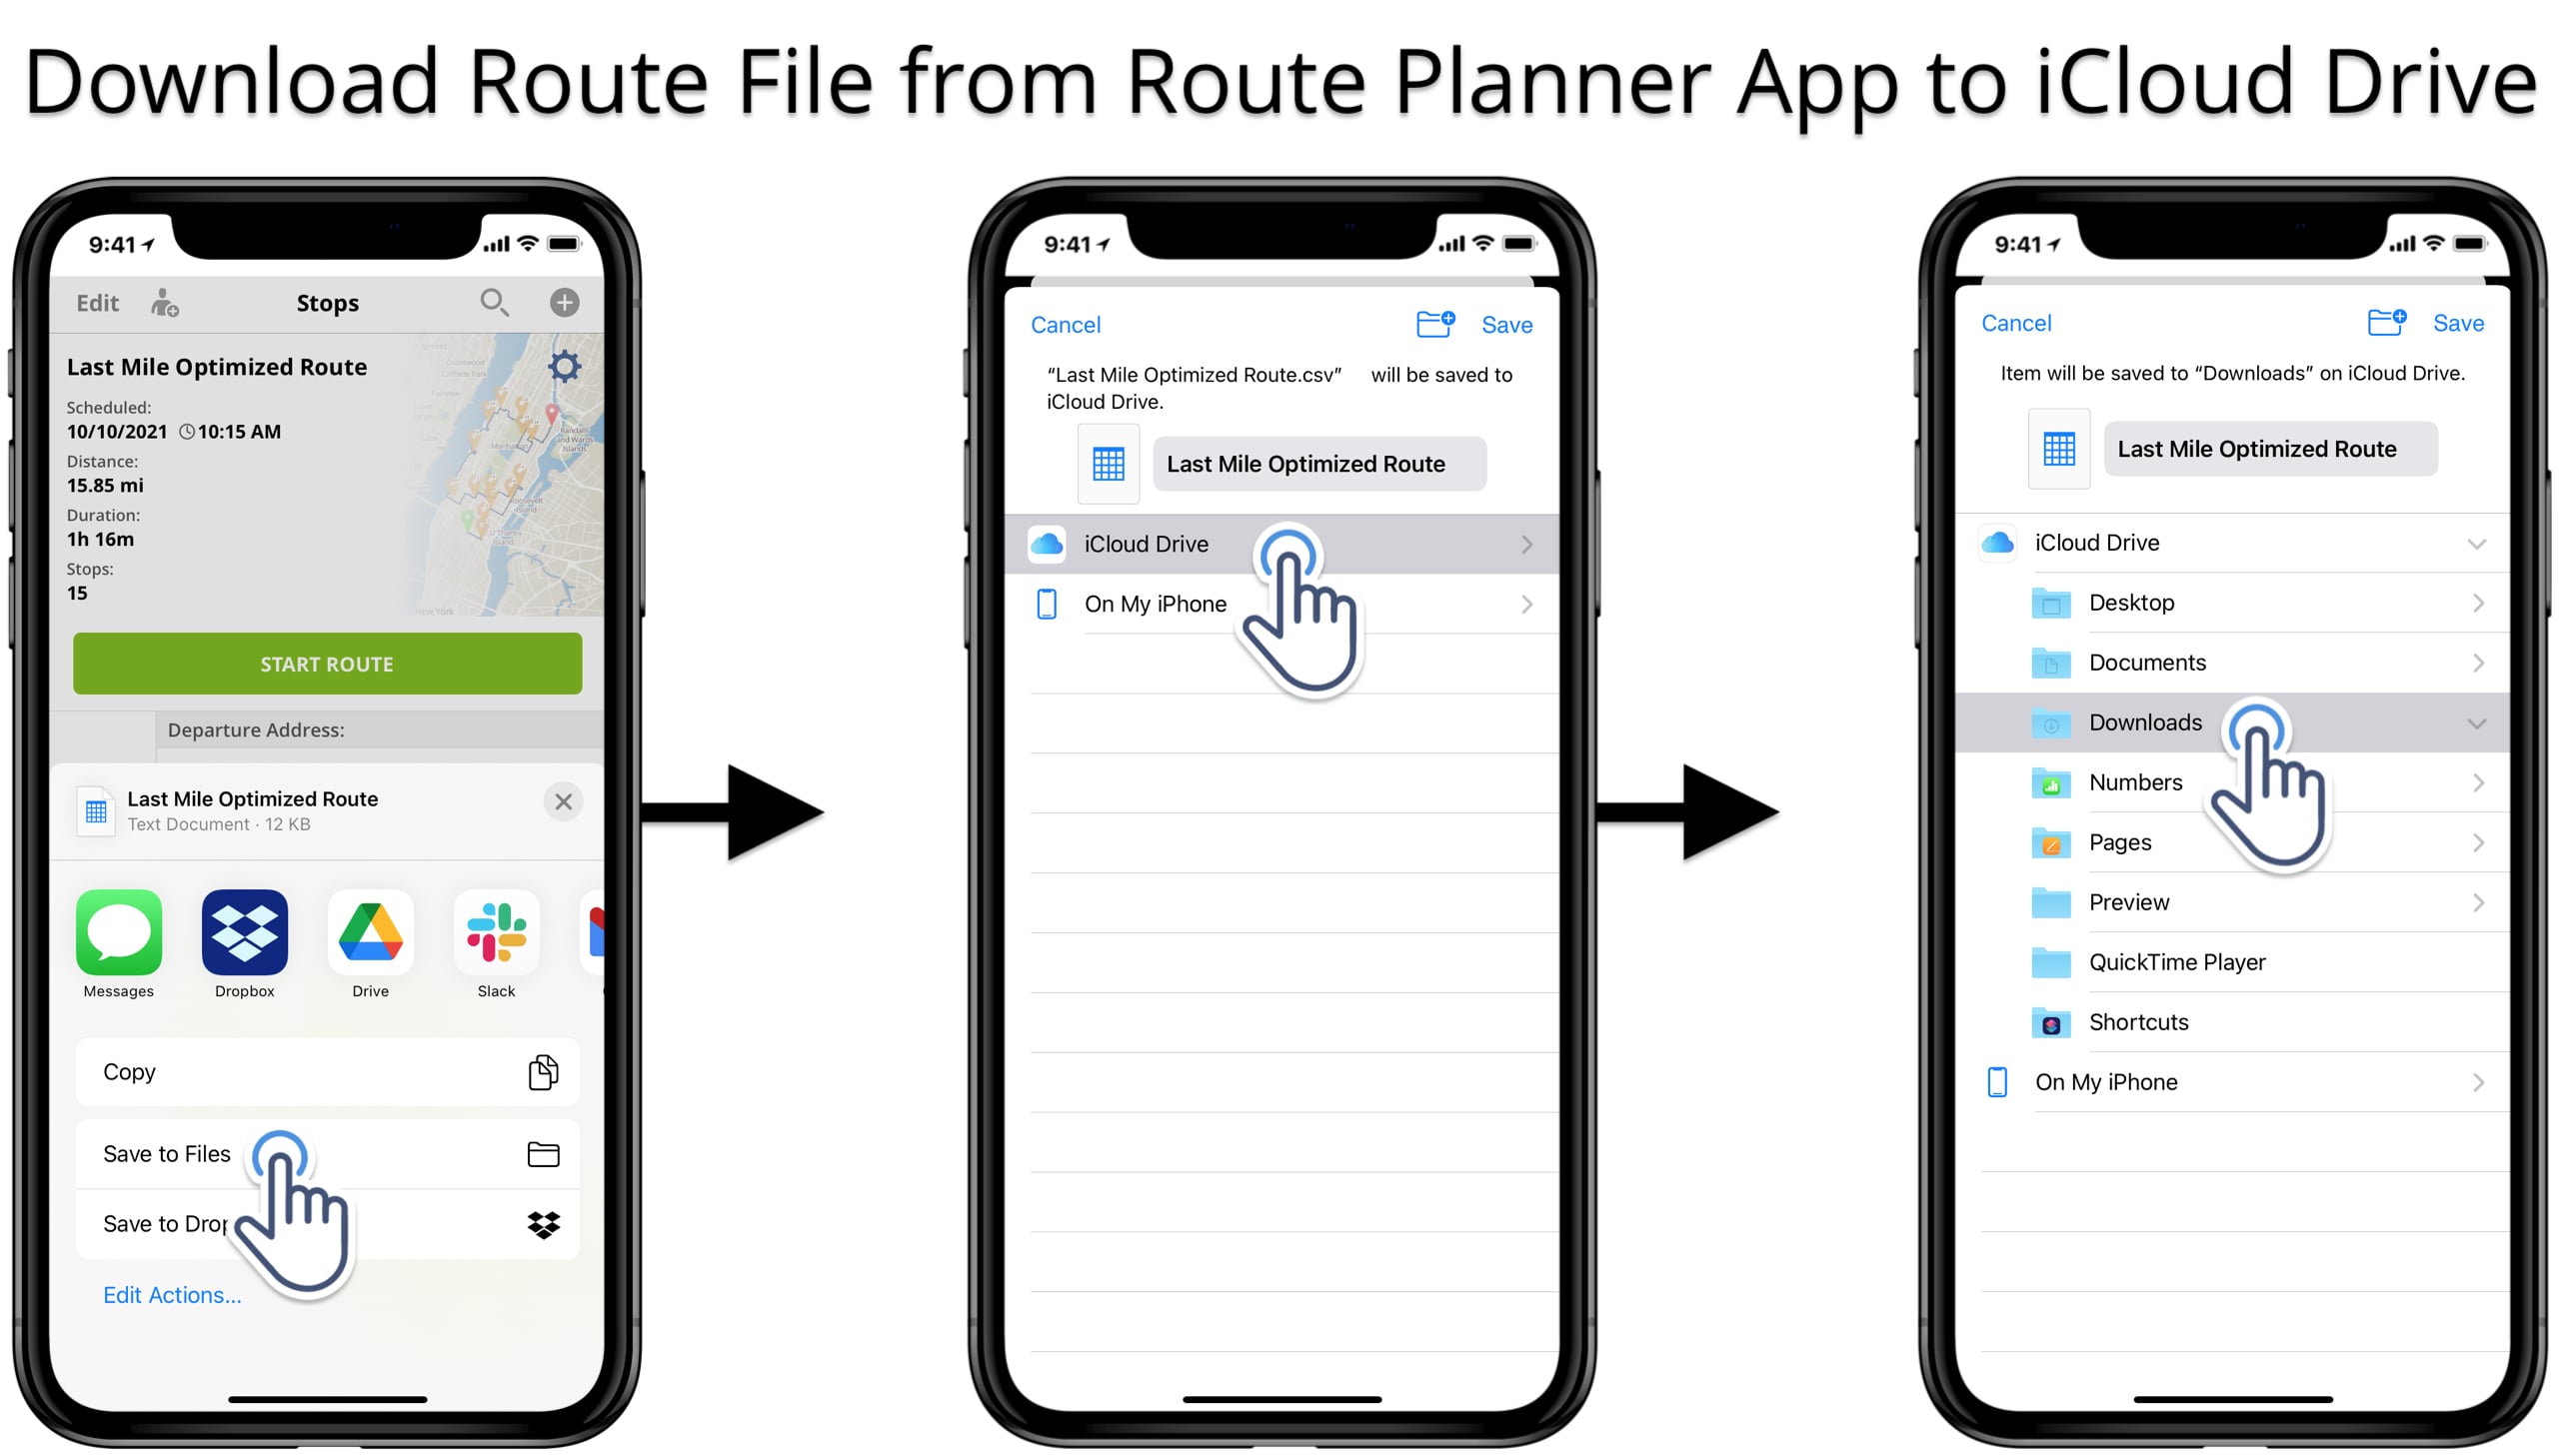 Download route planner routes to iPad or iPhone storage and iCloud.